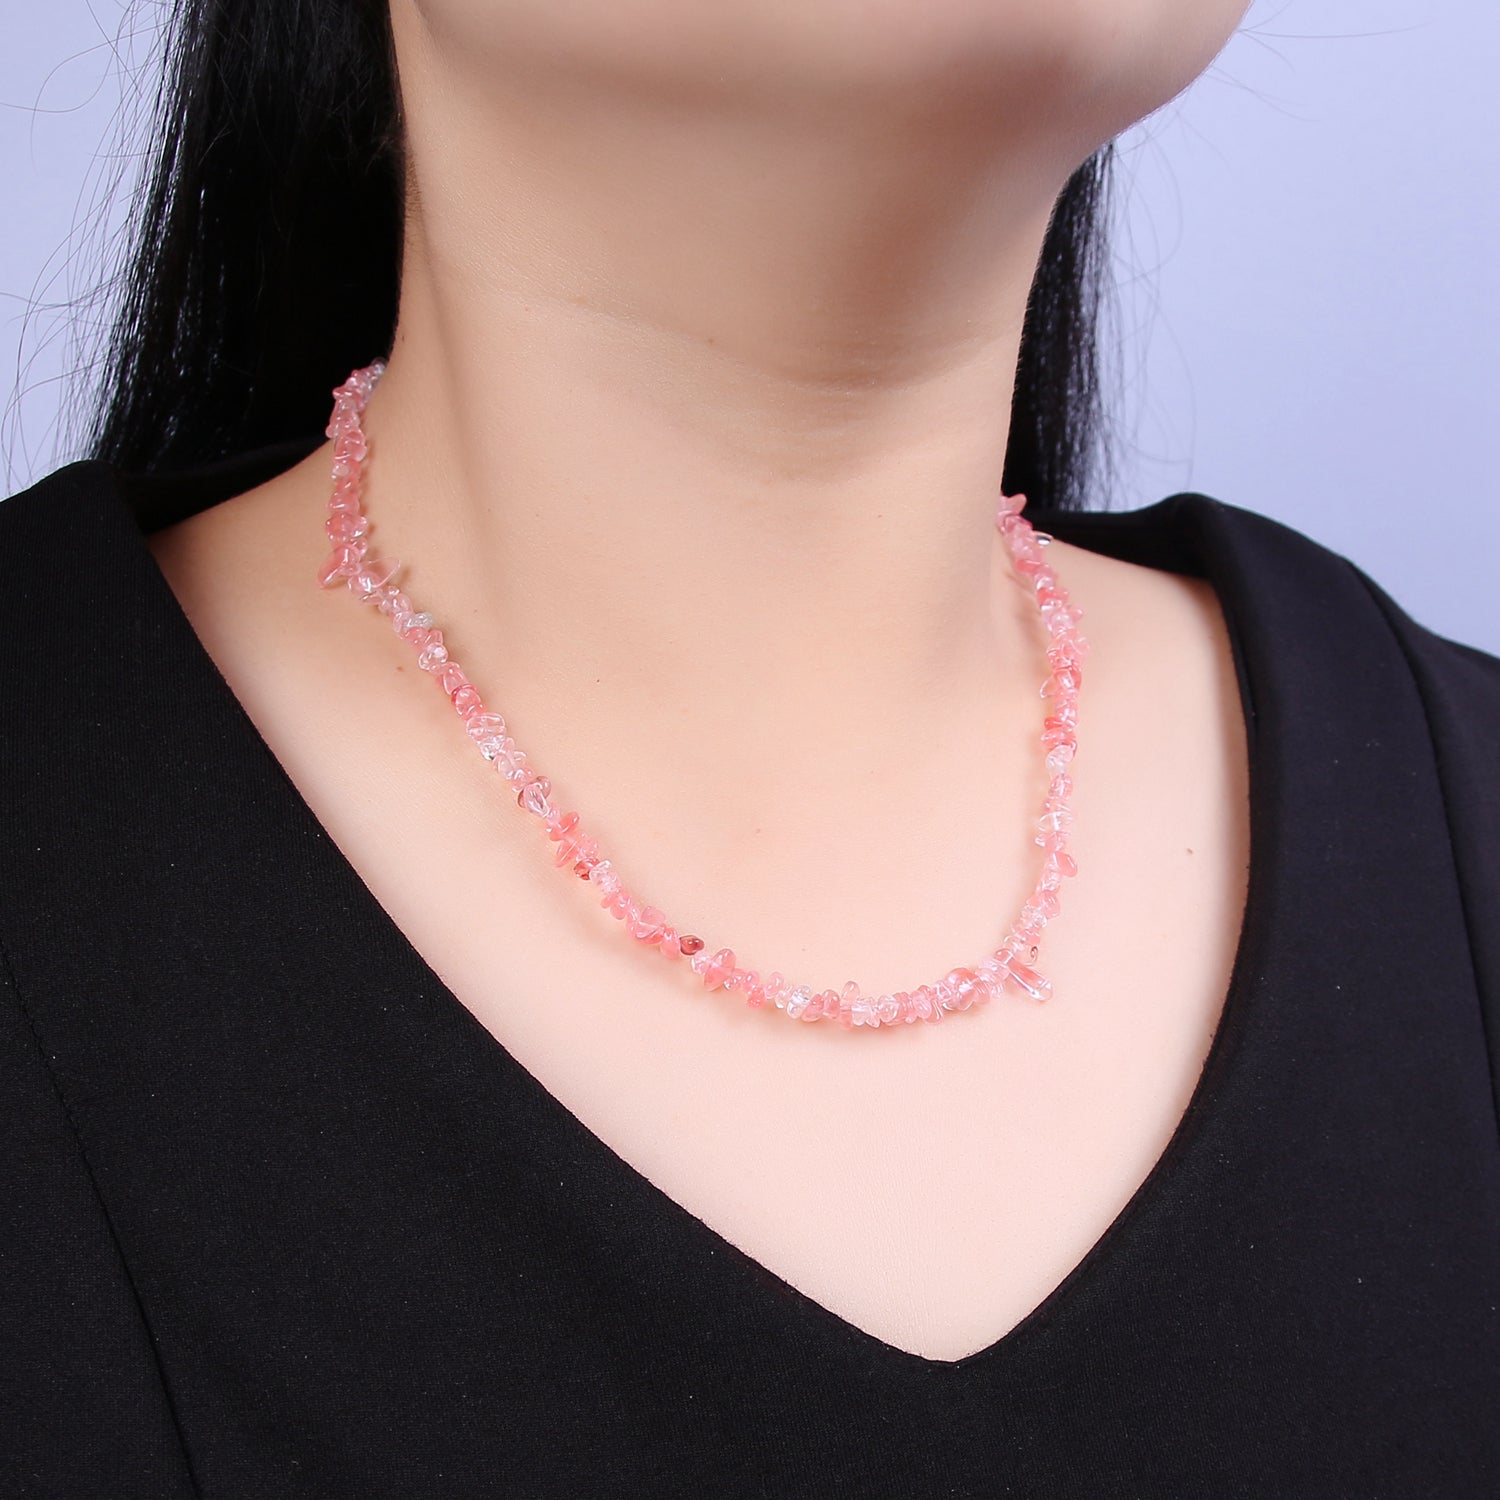 17.7 Inch Natural Watermelon Quartz Crystal Stone Bead Necklace with 2" Extender WA-634 - DLUXCA